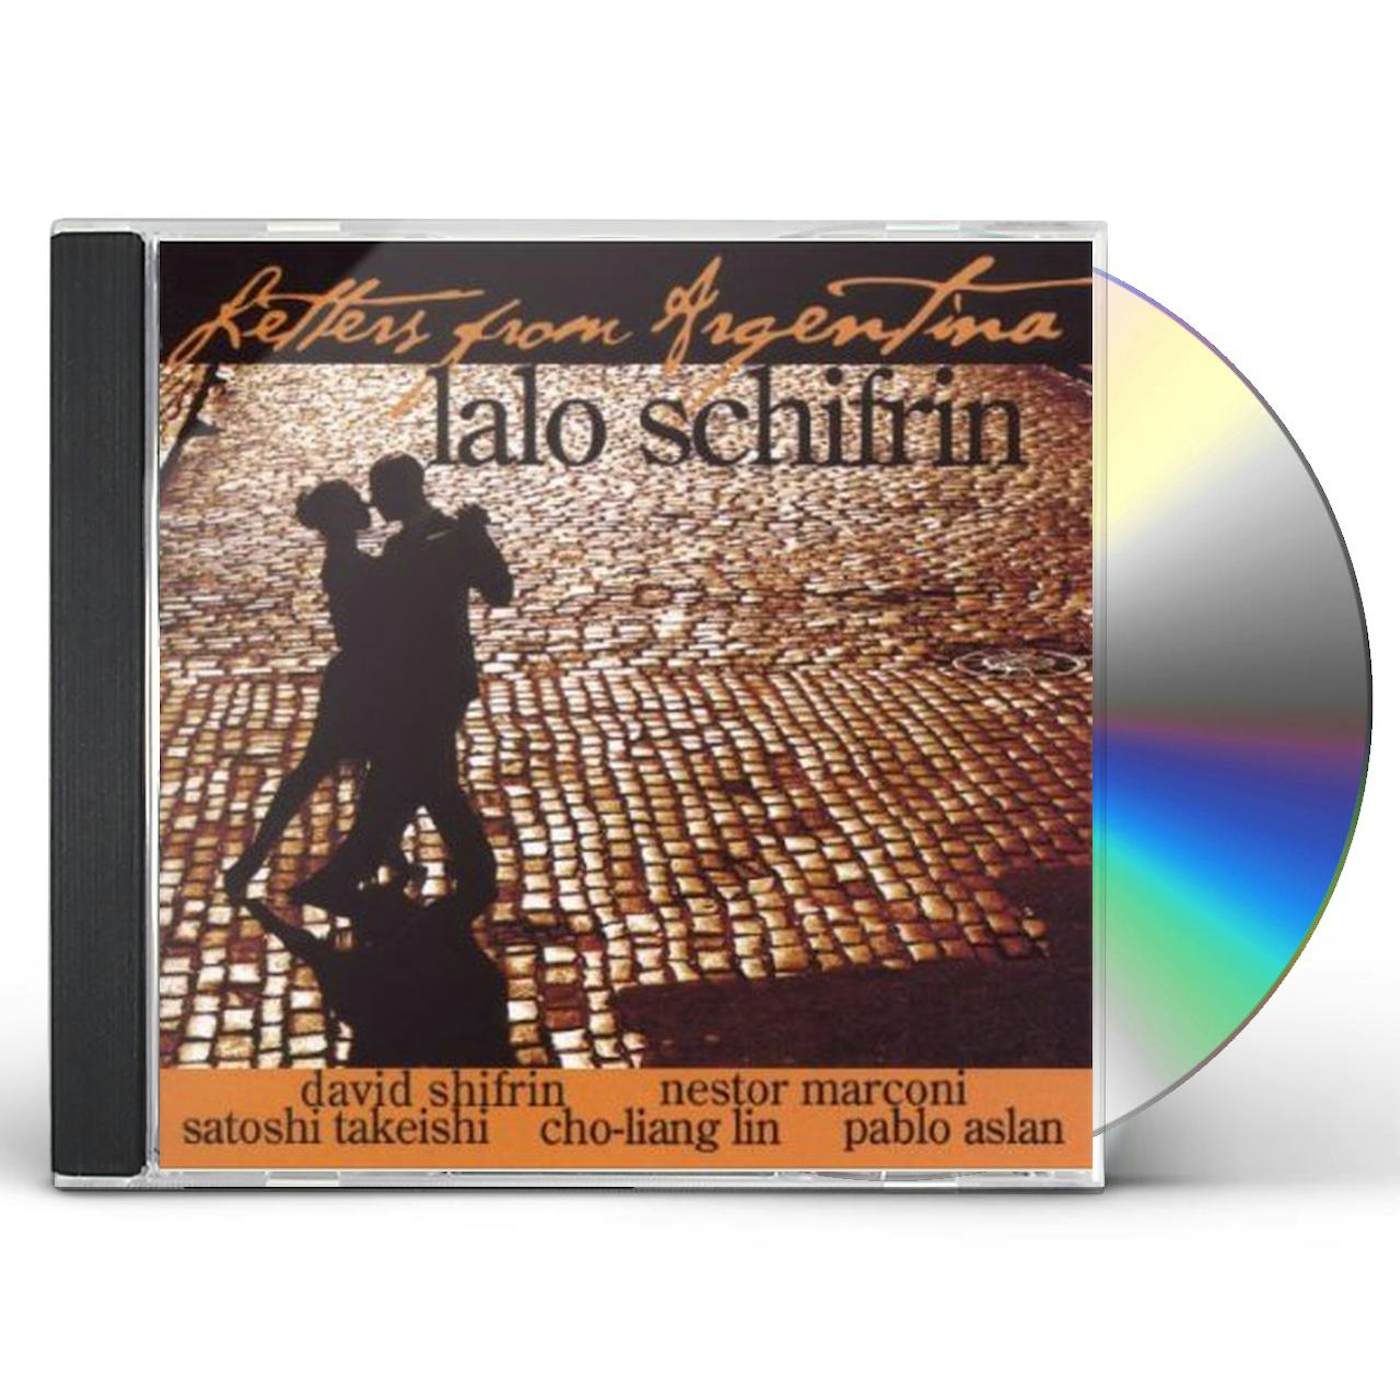 Lalo Schifrin LETTERS FROM ARGENTINA CD